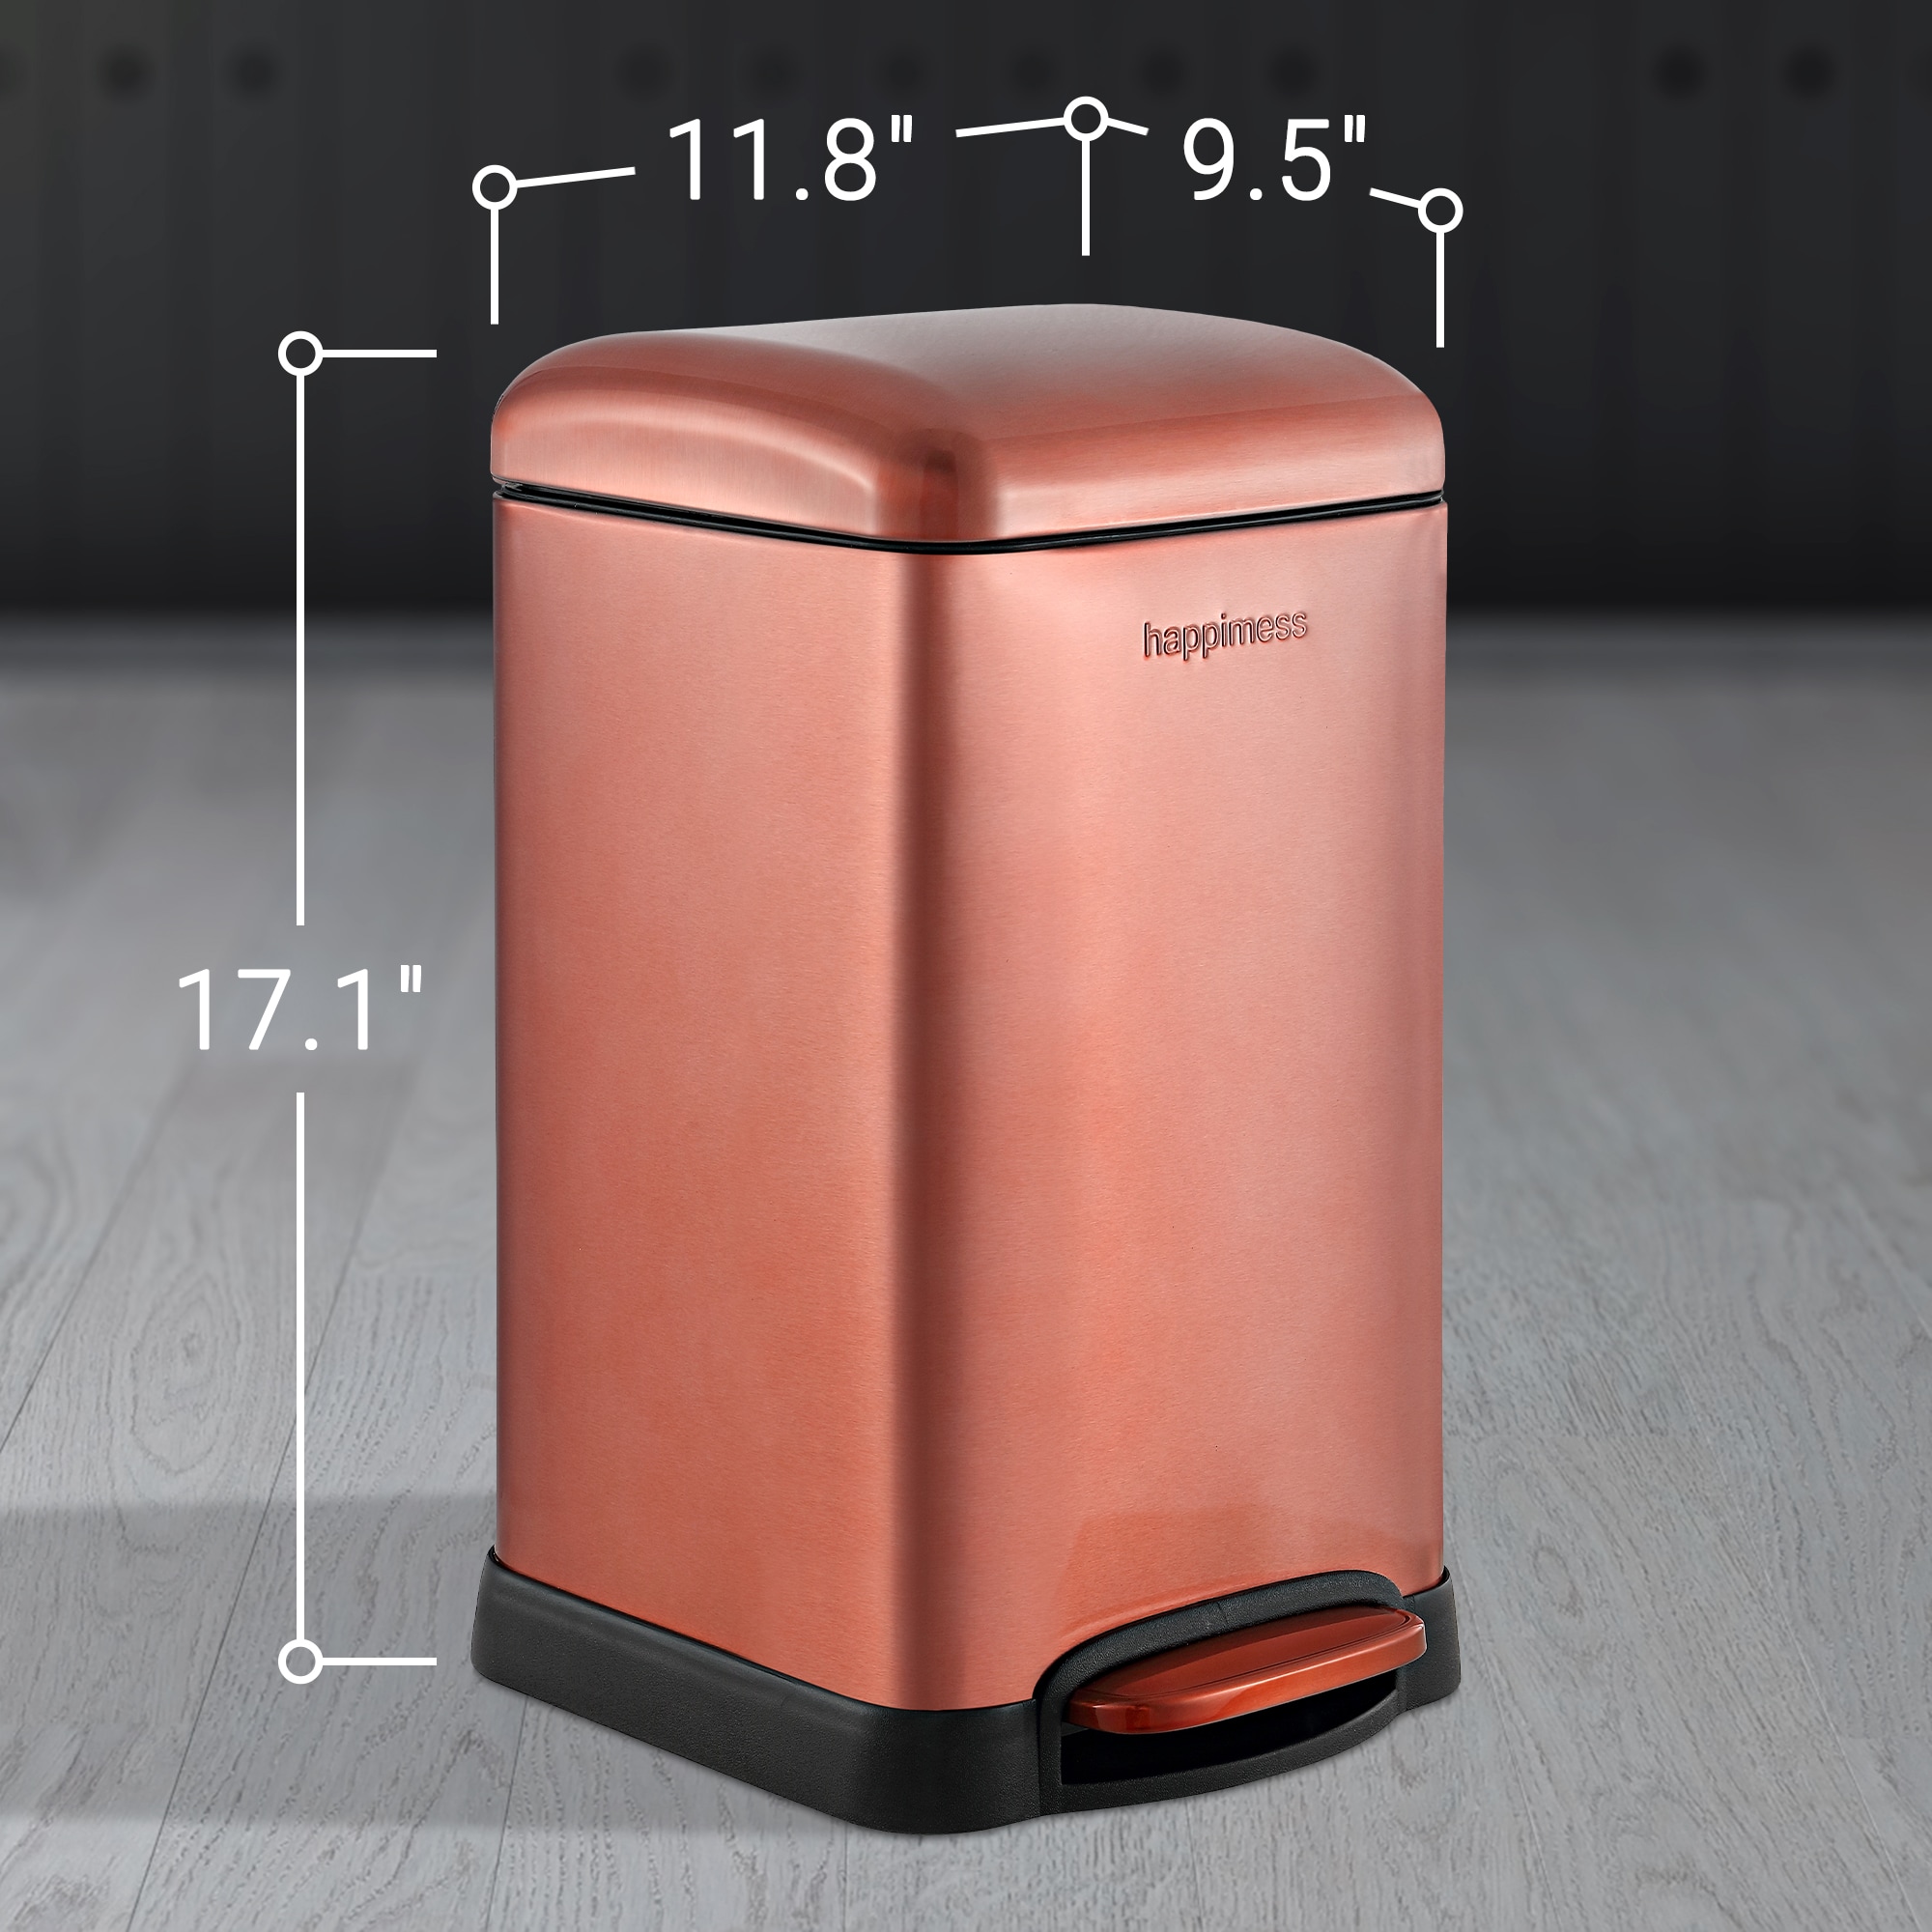 Stainless Steel 13-Gallon Kitchen Trash Can with Step Lid in Copper Bronze